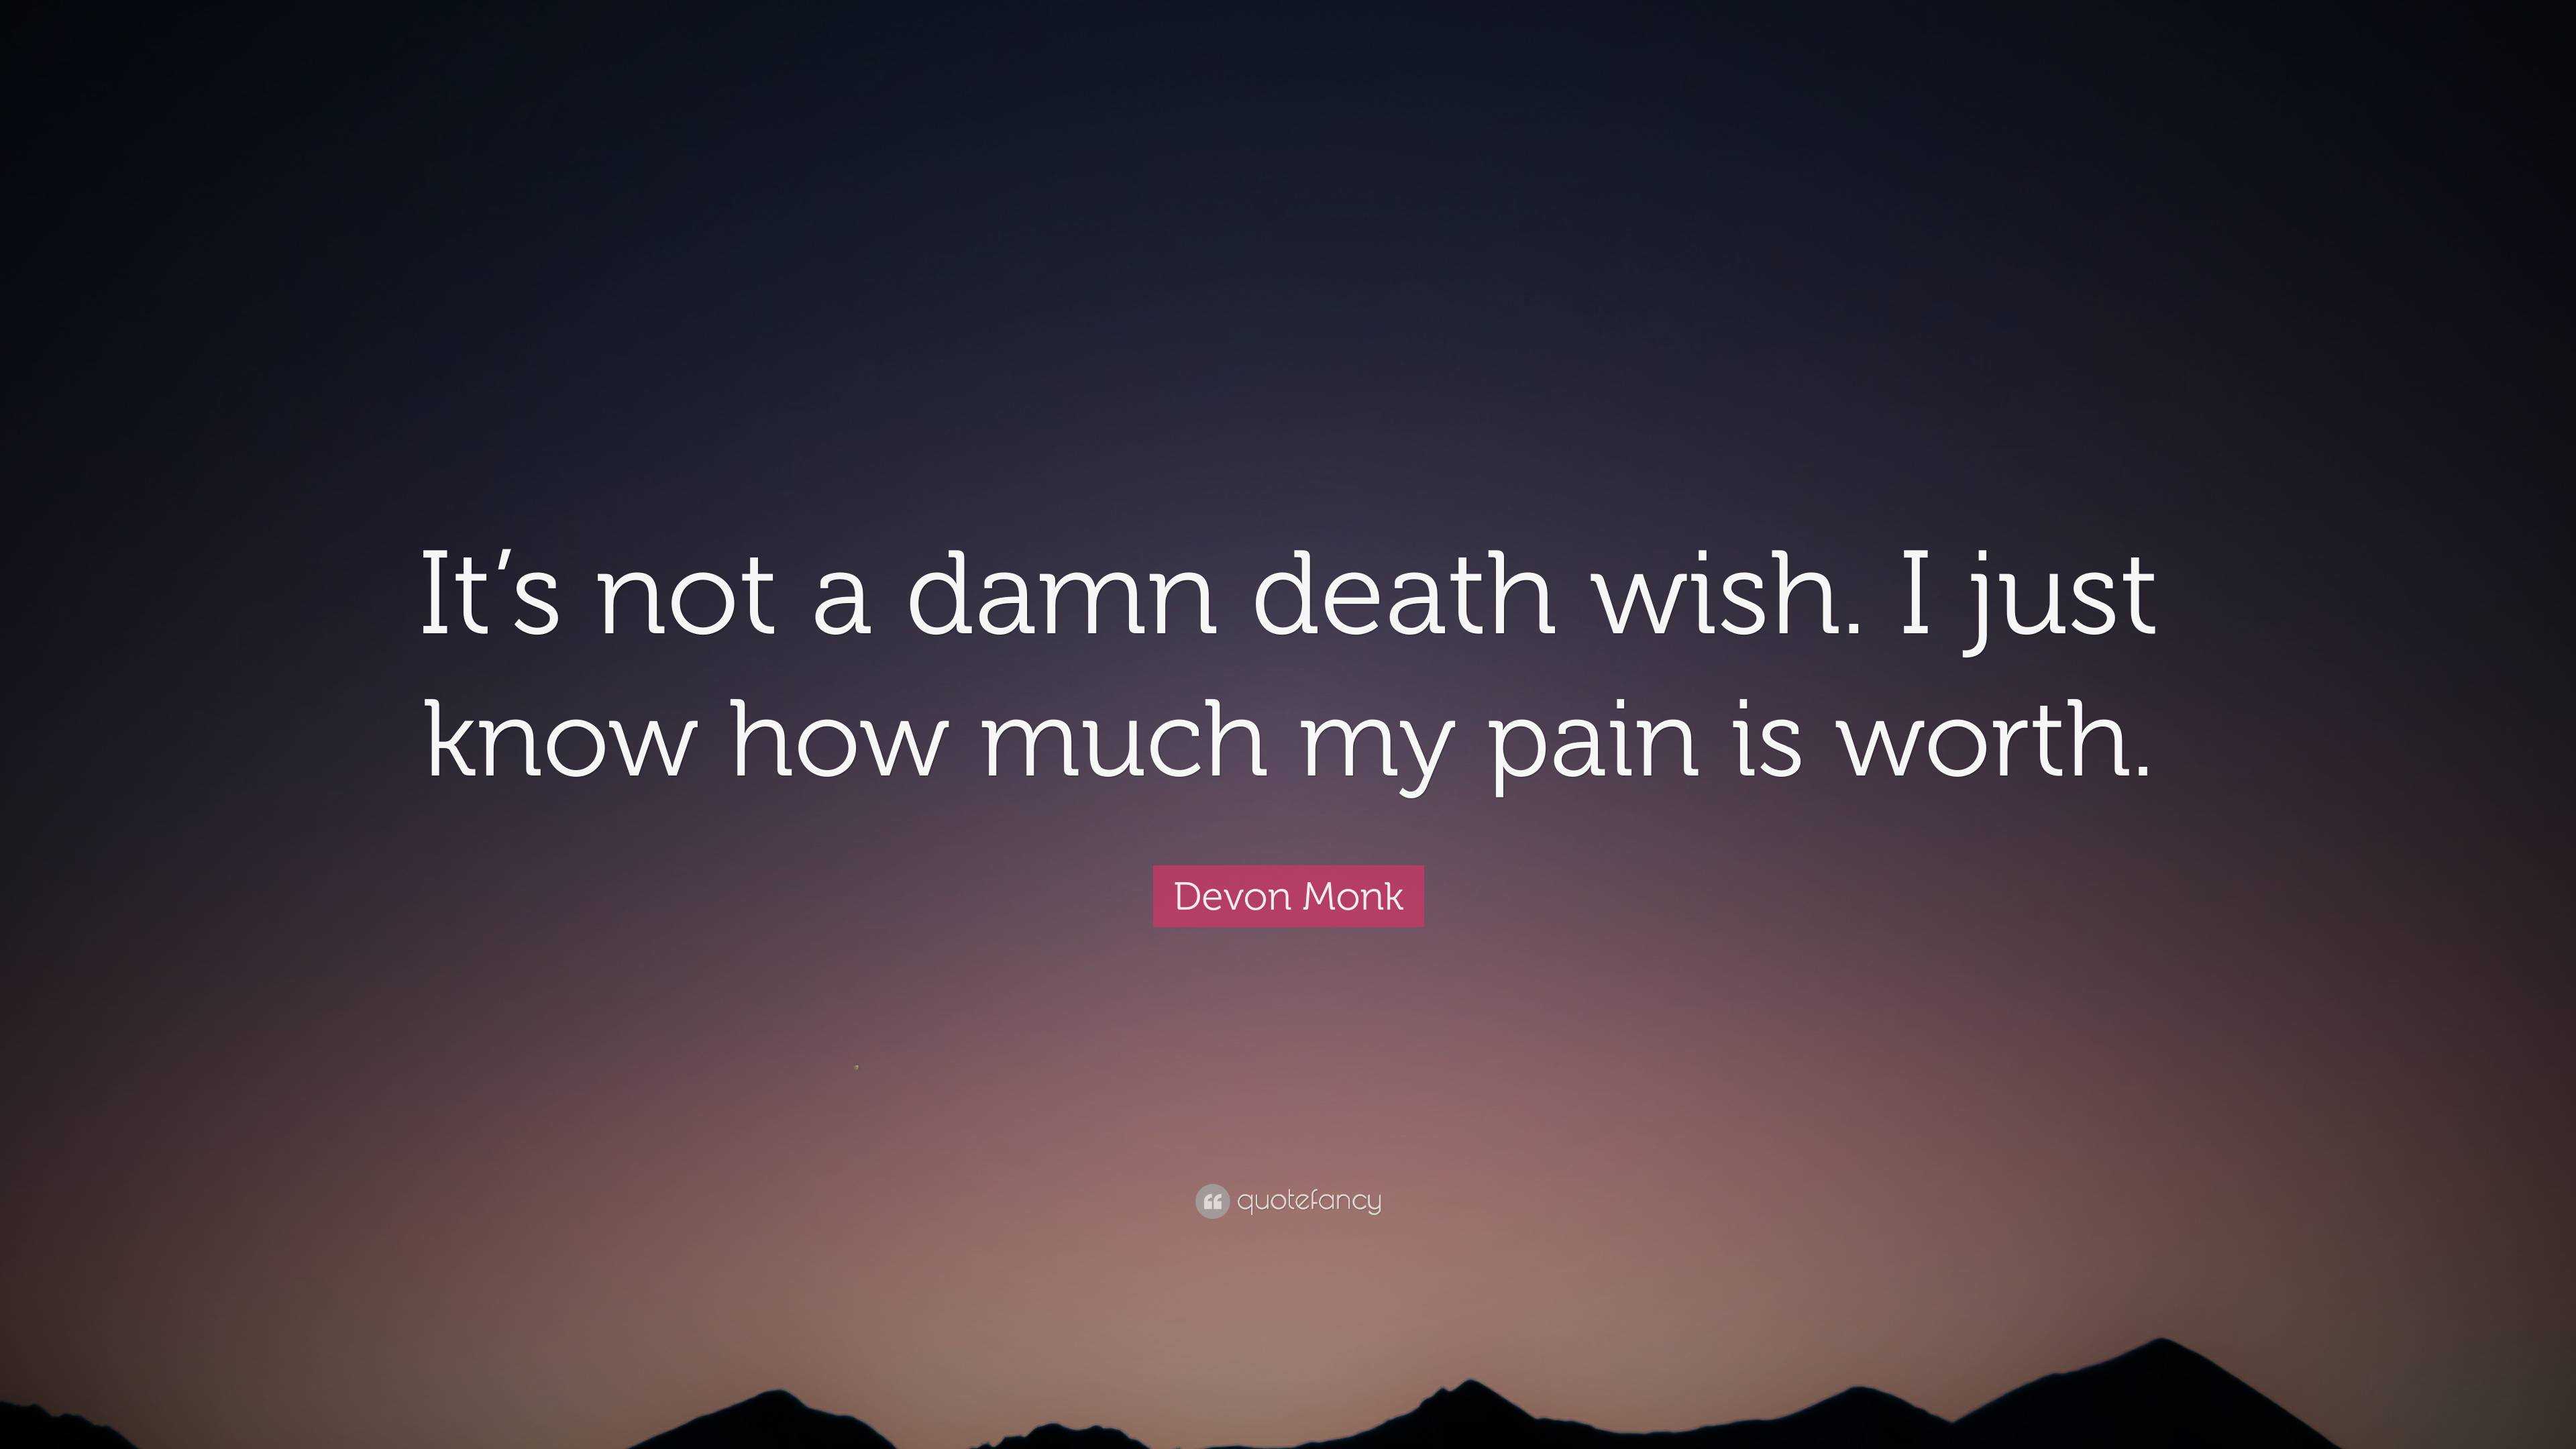 Devon Monk Quote: “It’s not a damn death wish. I just know how much my ...